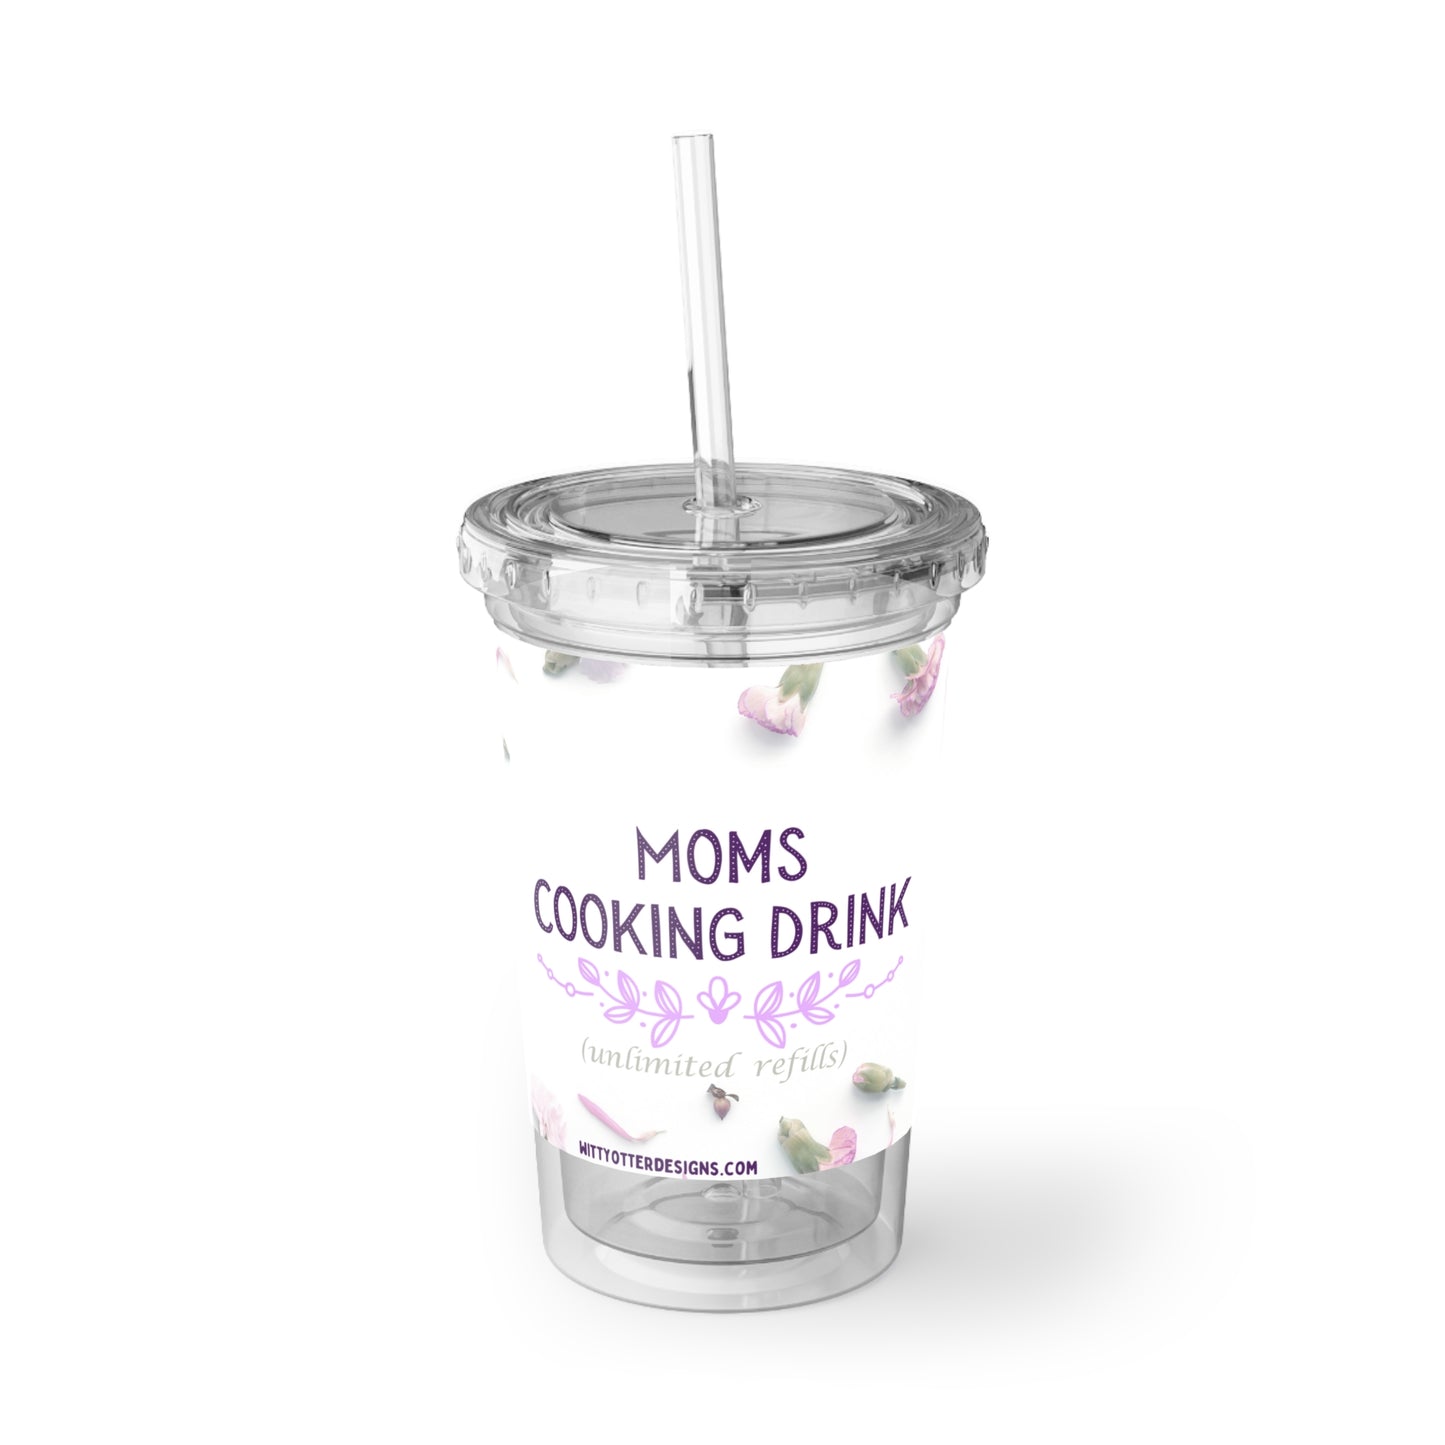 Moms cooking drink cup / Gift for Mom